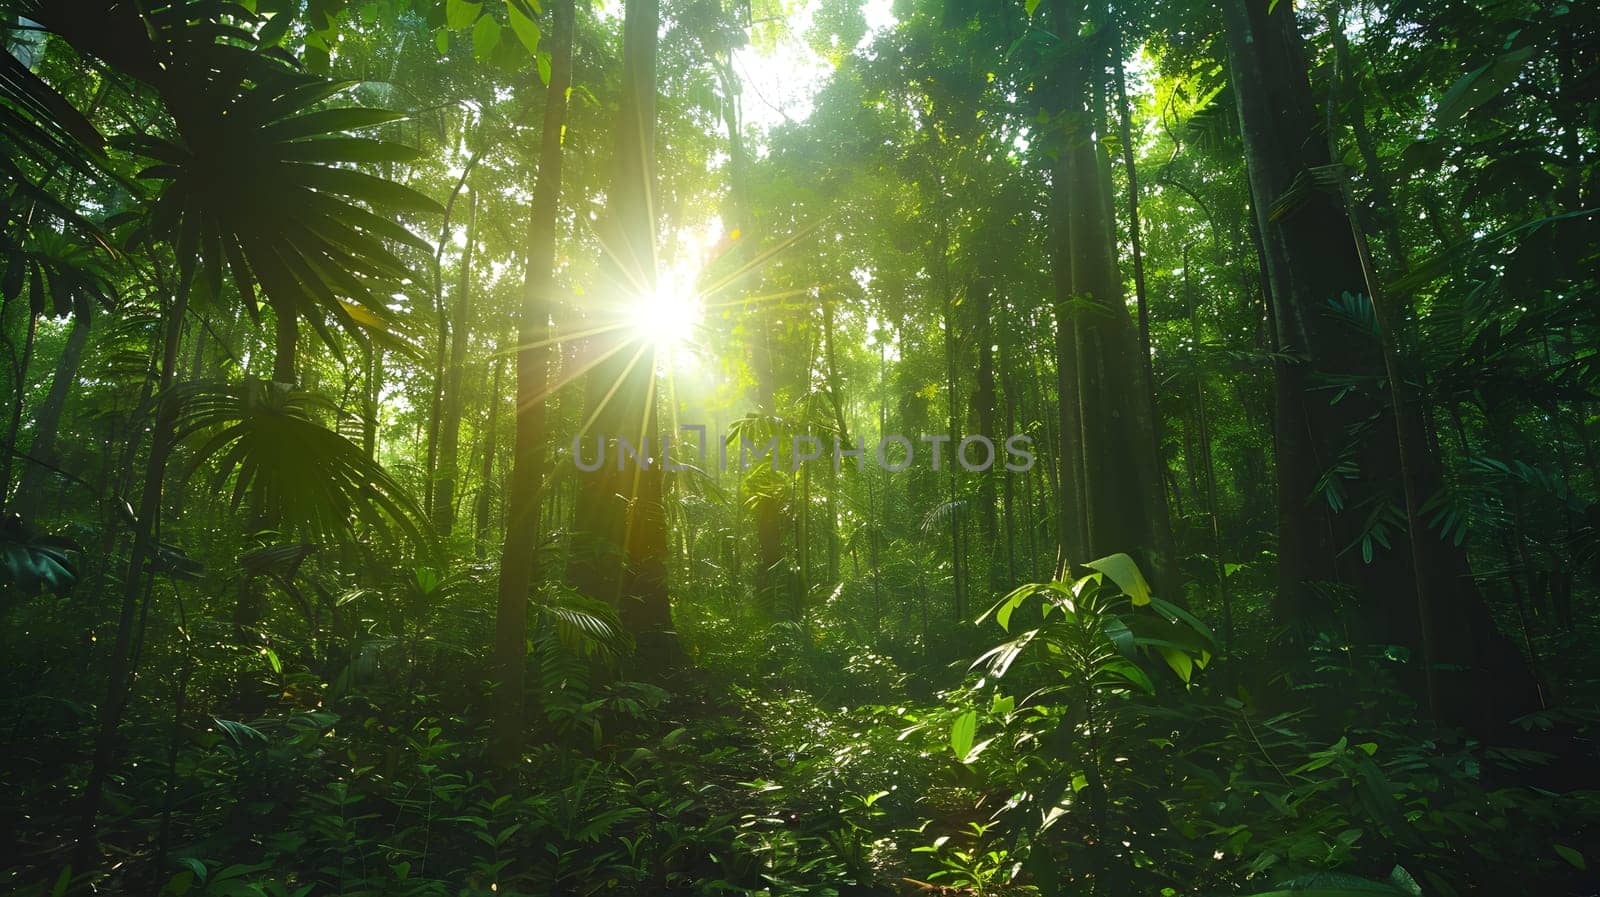 Sunlight filters through jungle canopy onto terrestrial plants and tree trunks by Nadtochiy